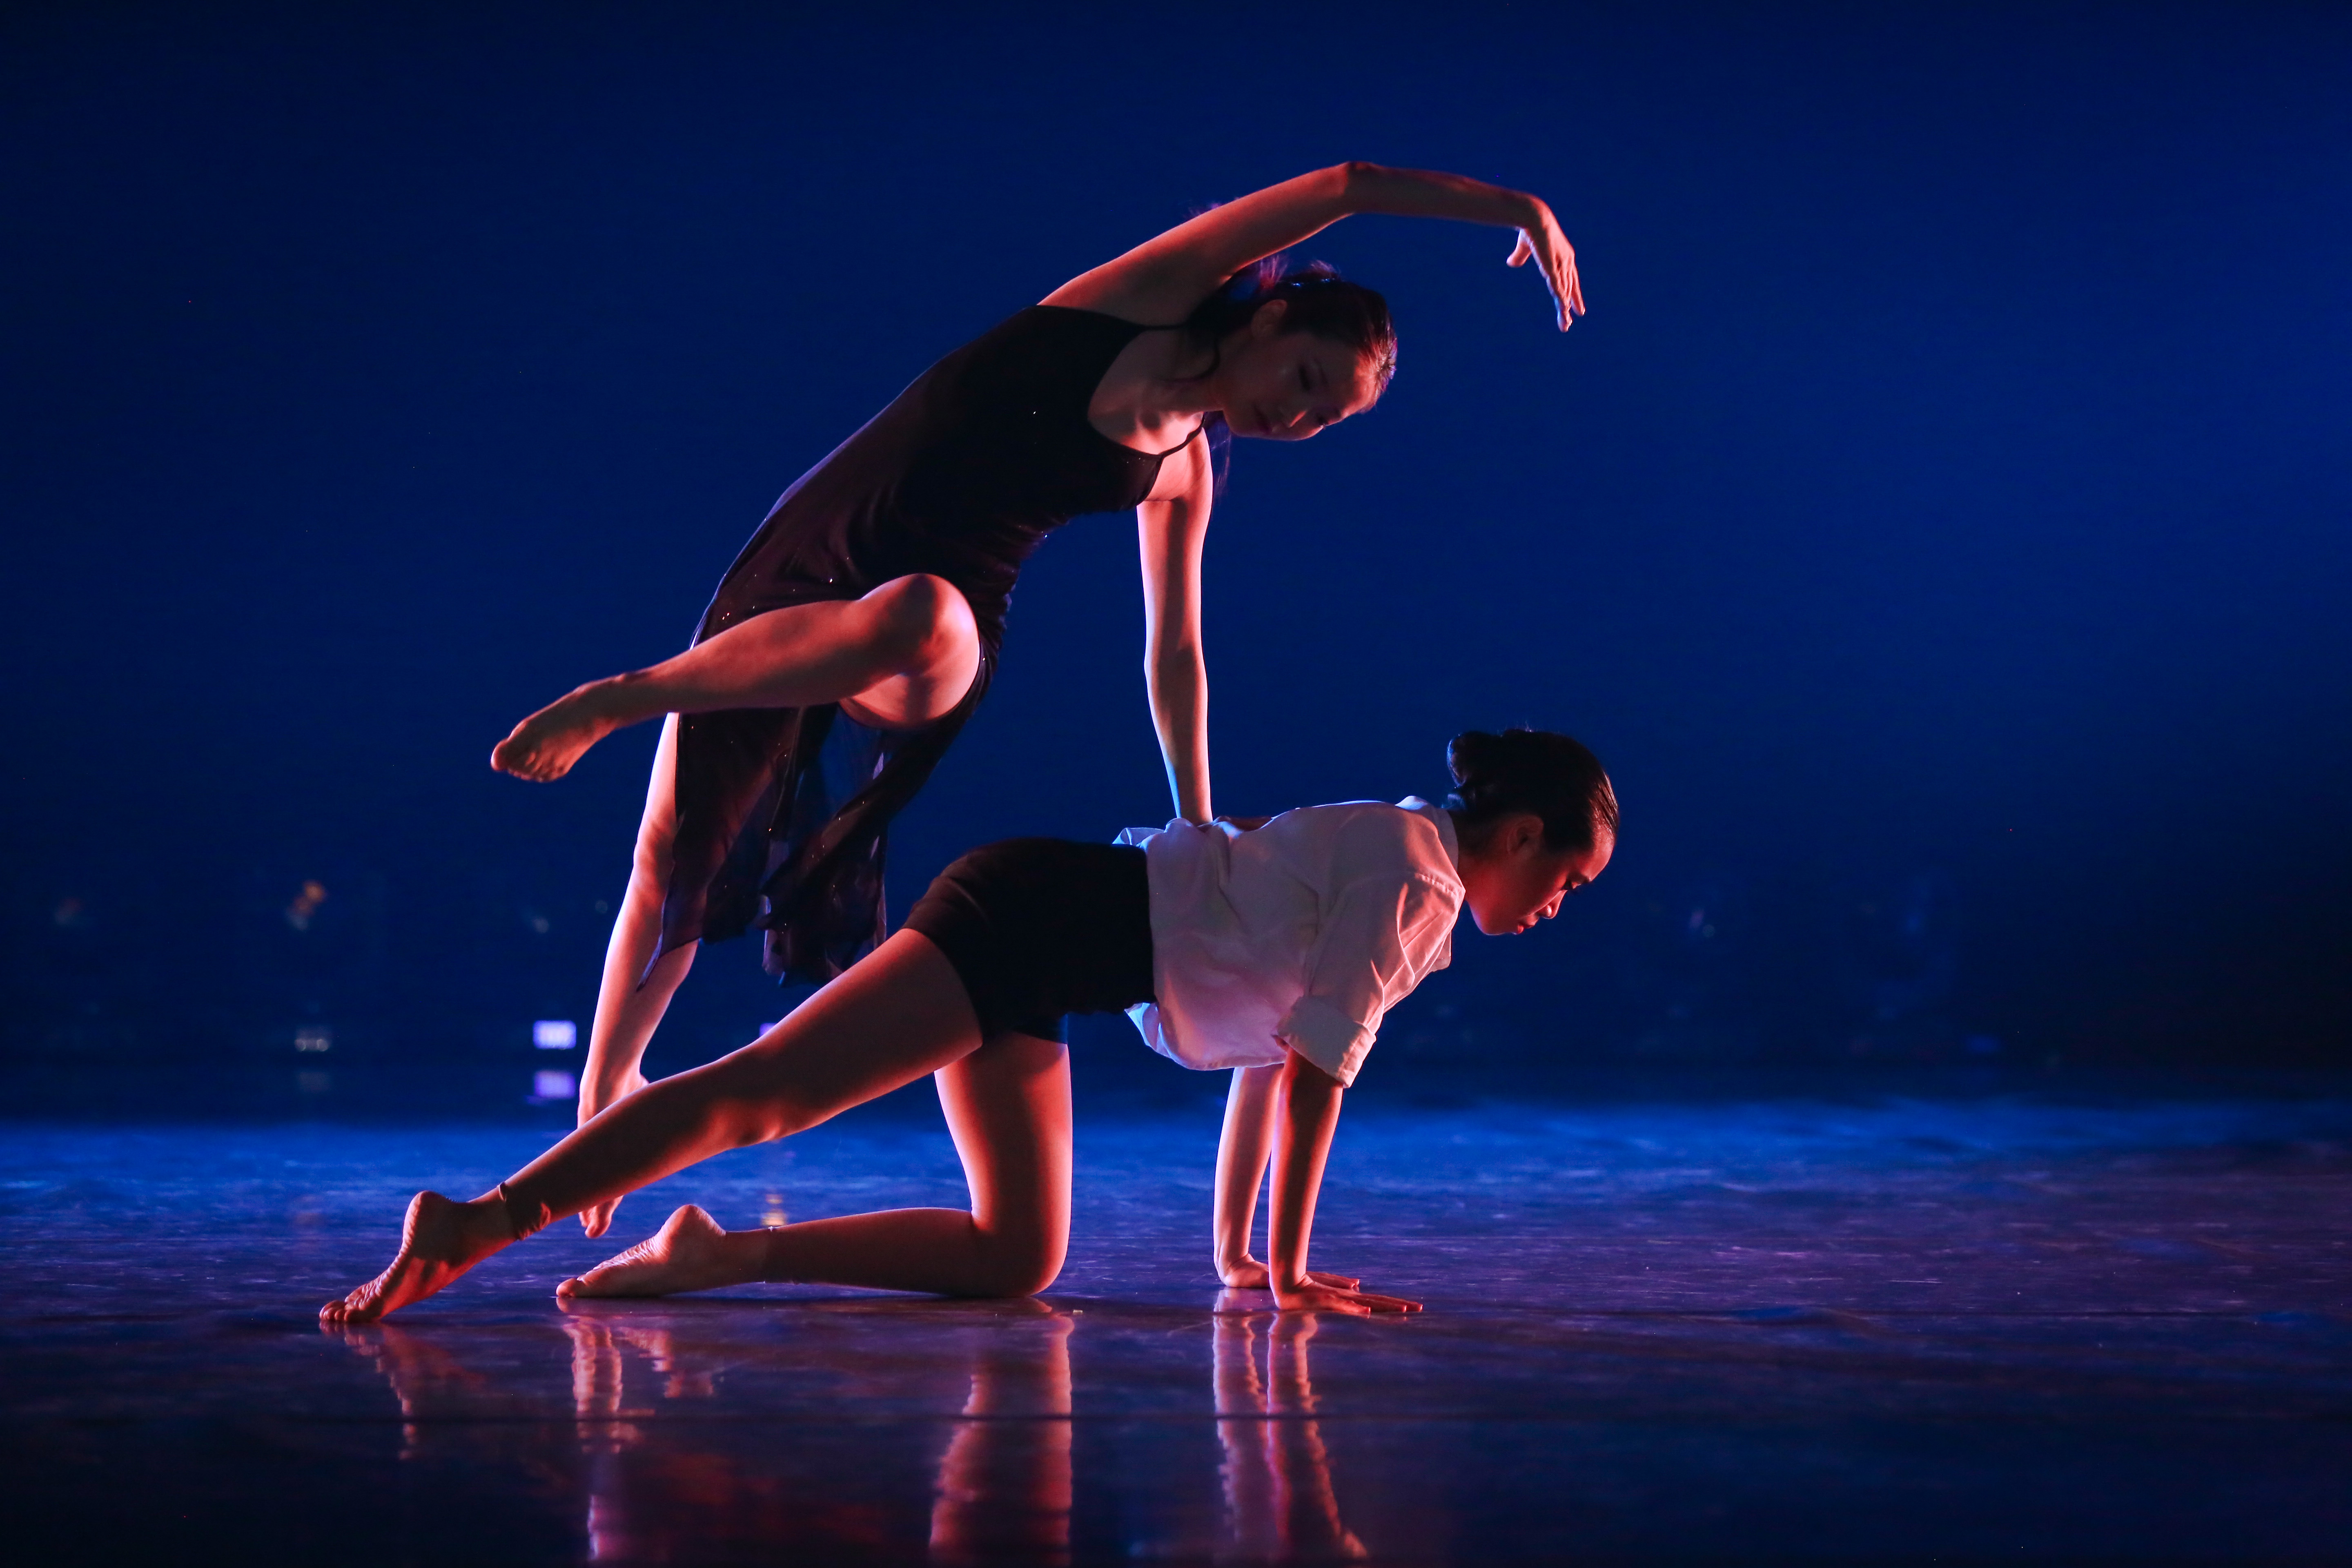 Two dancers strike a pose in dramatic lighting